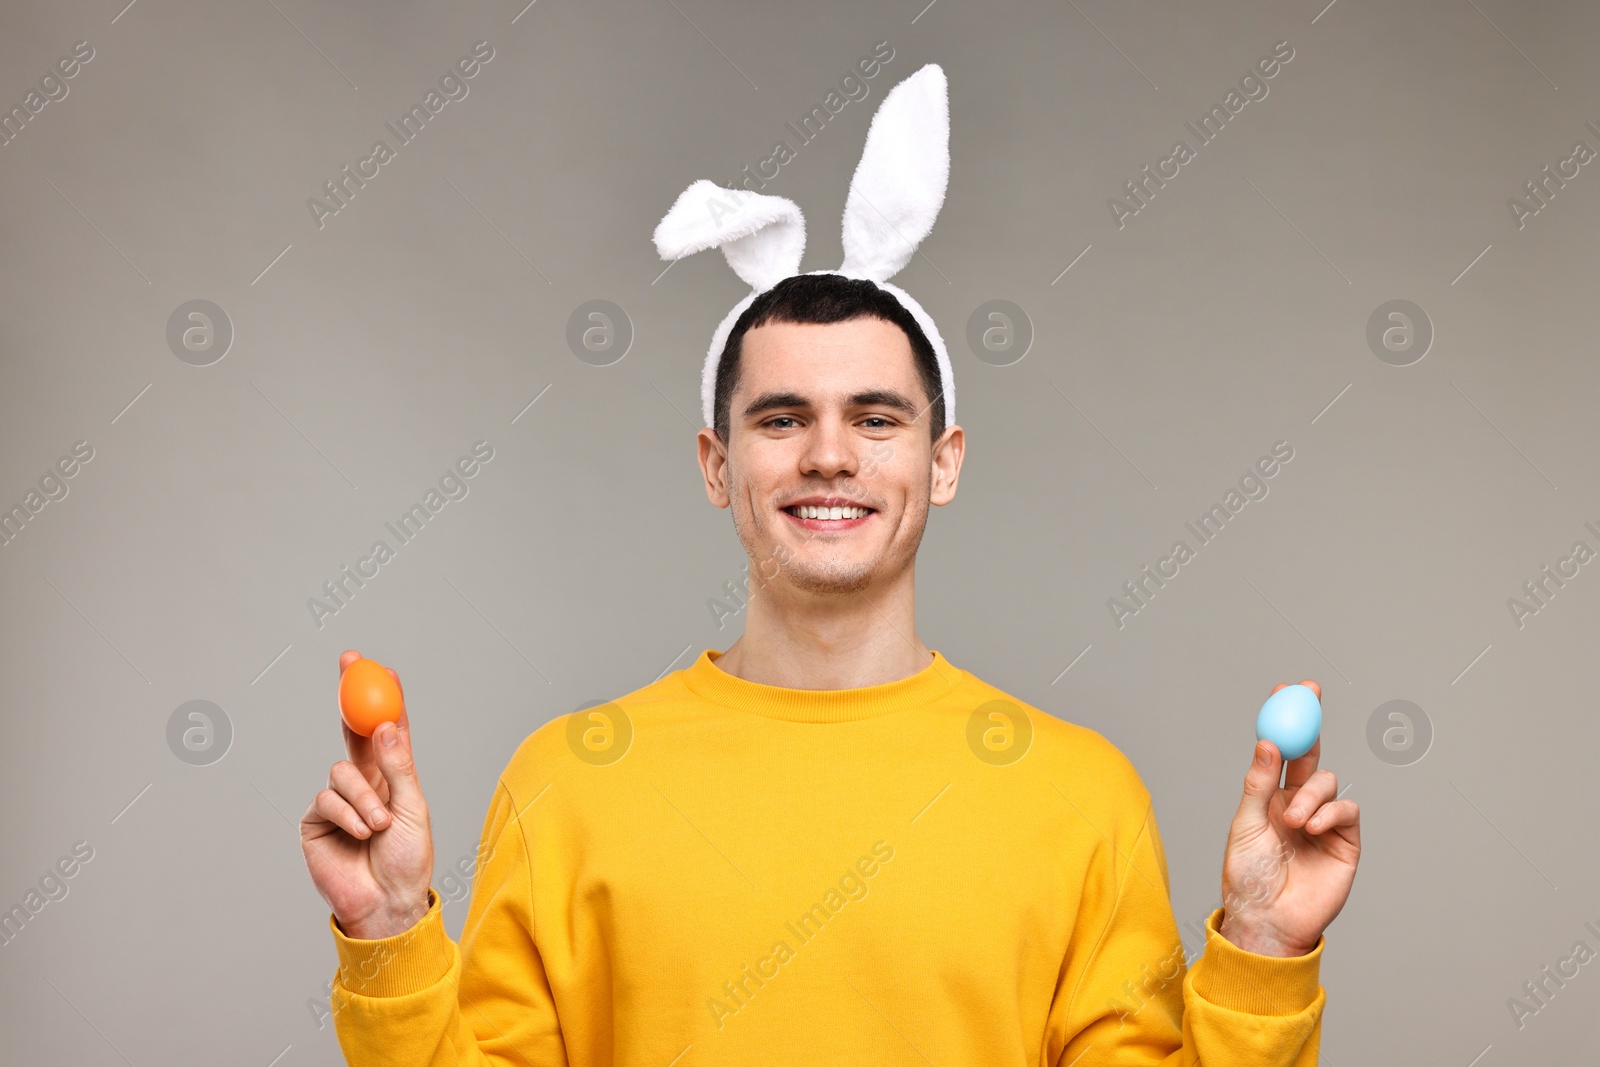 Photo of Easter celebration. Handsome young man with bunny ears holding painted eggs on grey background